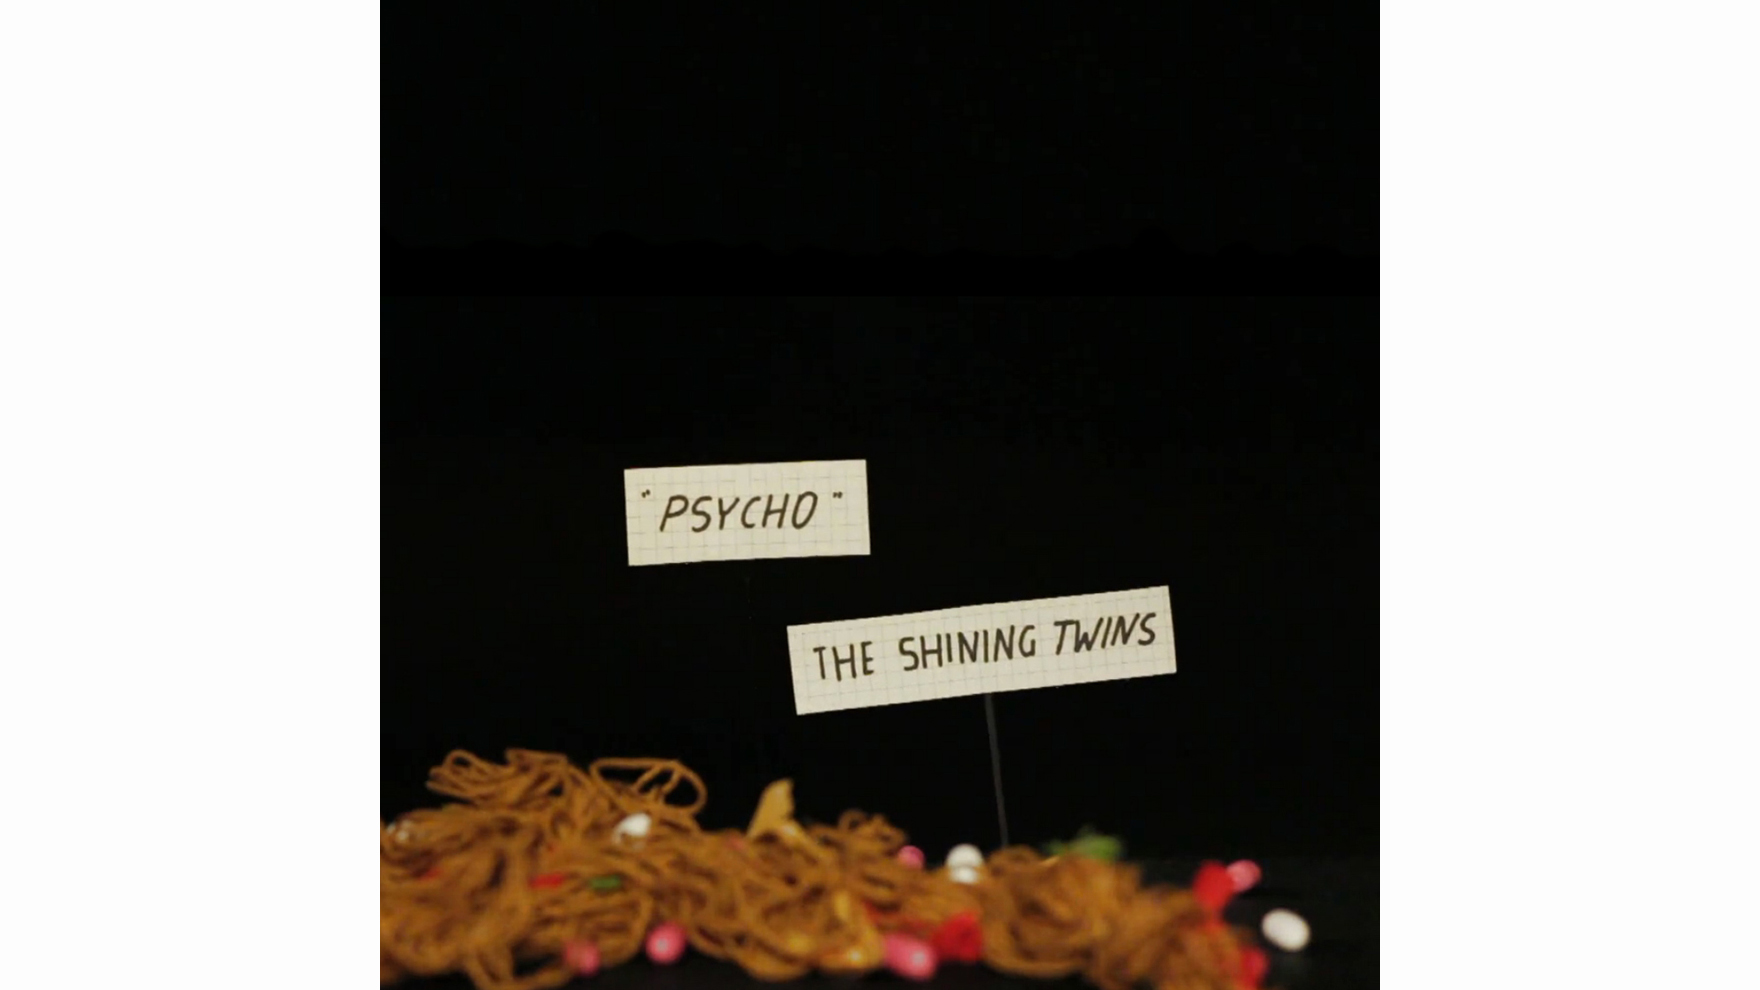 Details from Psycho music video